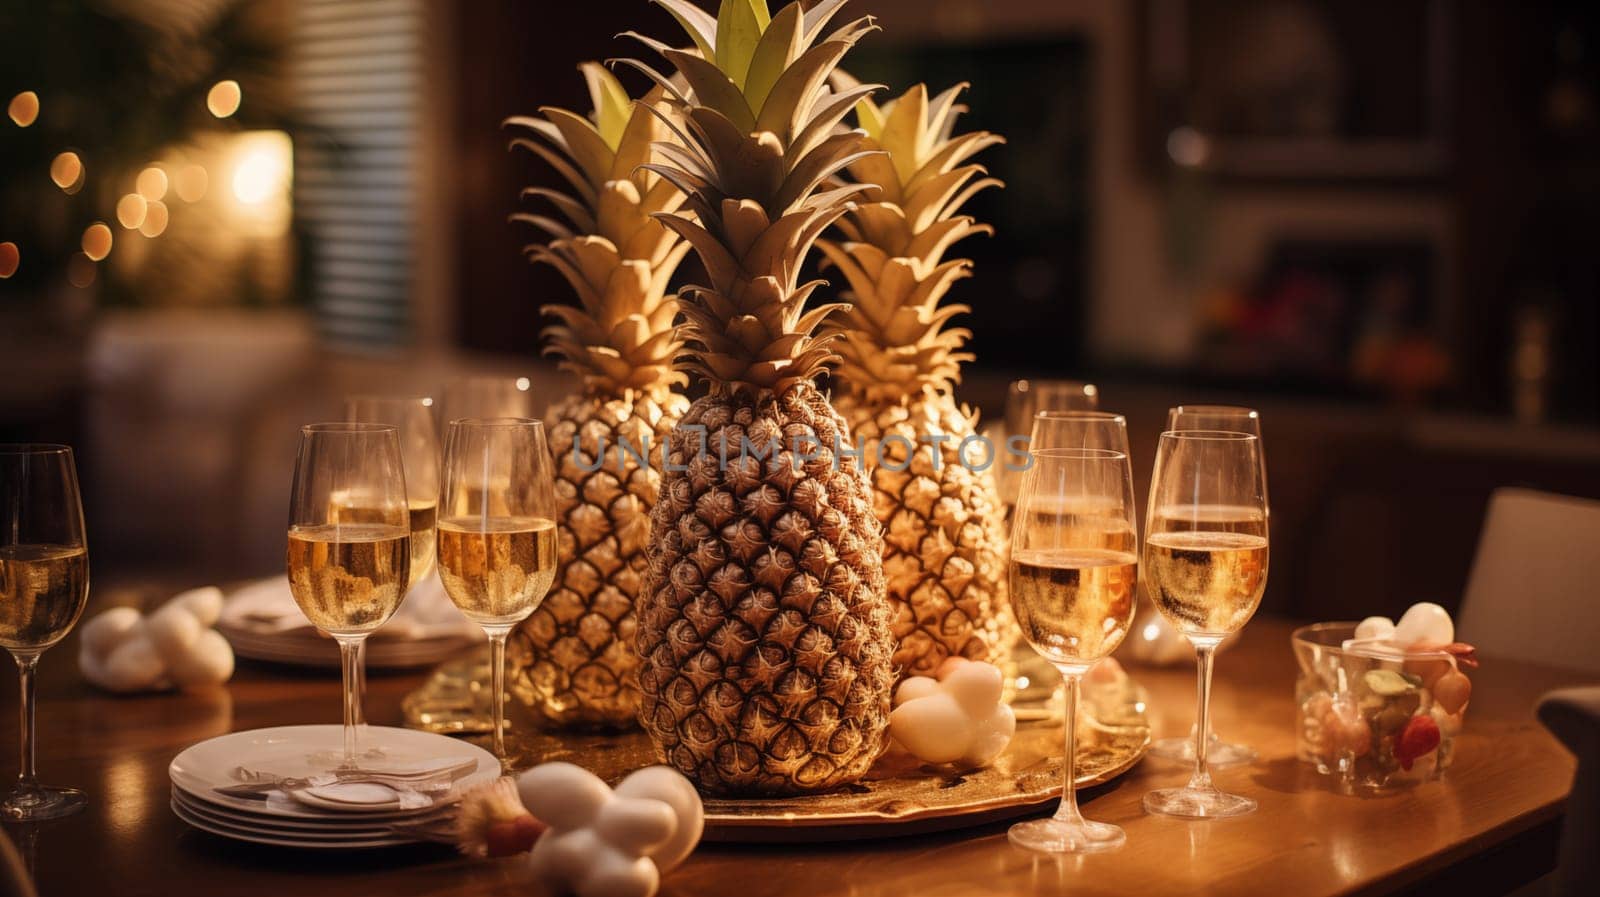 Beautiful golden pineapples, standing on the table, next to glasses of champagne, warm evening light.